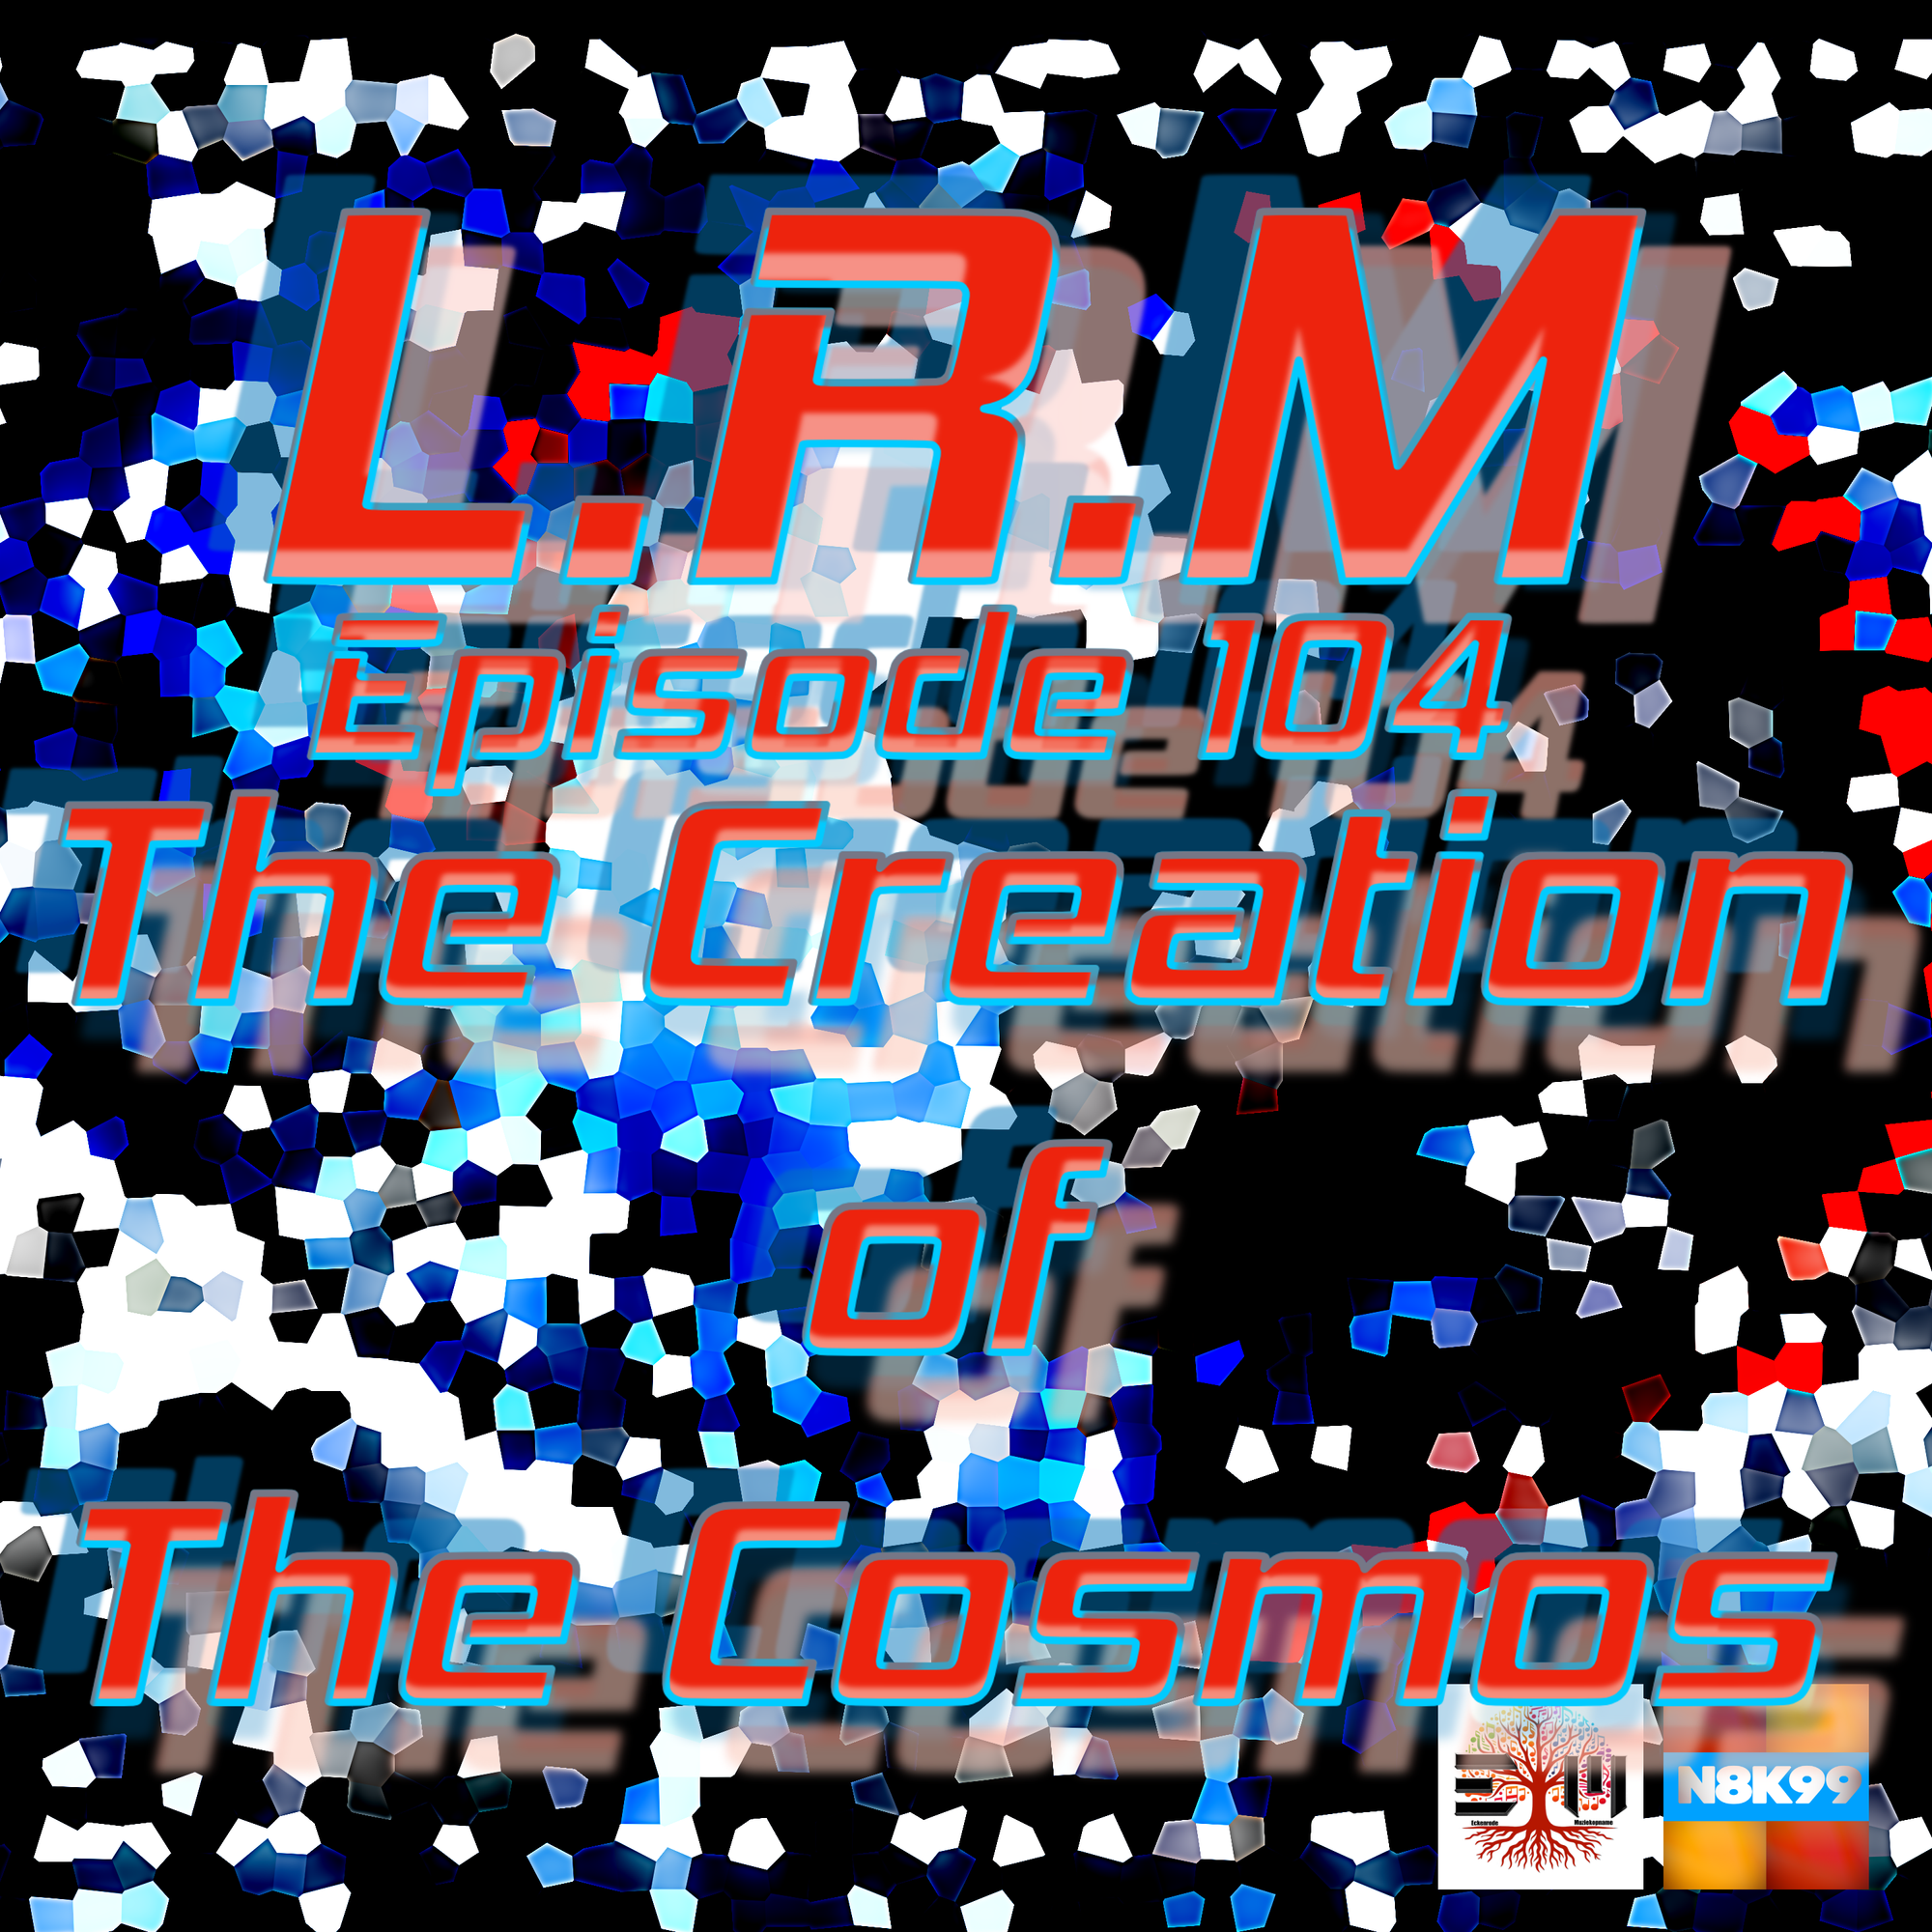 Episode 104 - "The Creation of The Cosmos Volume I"